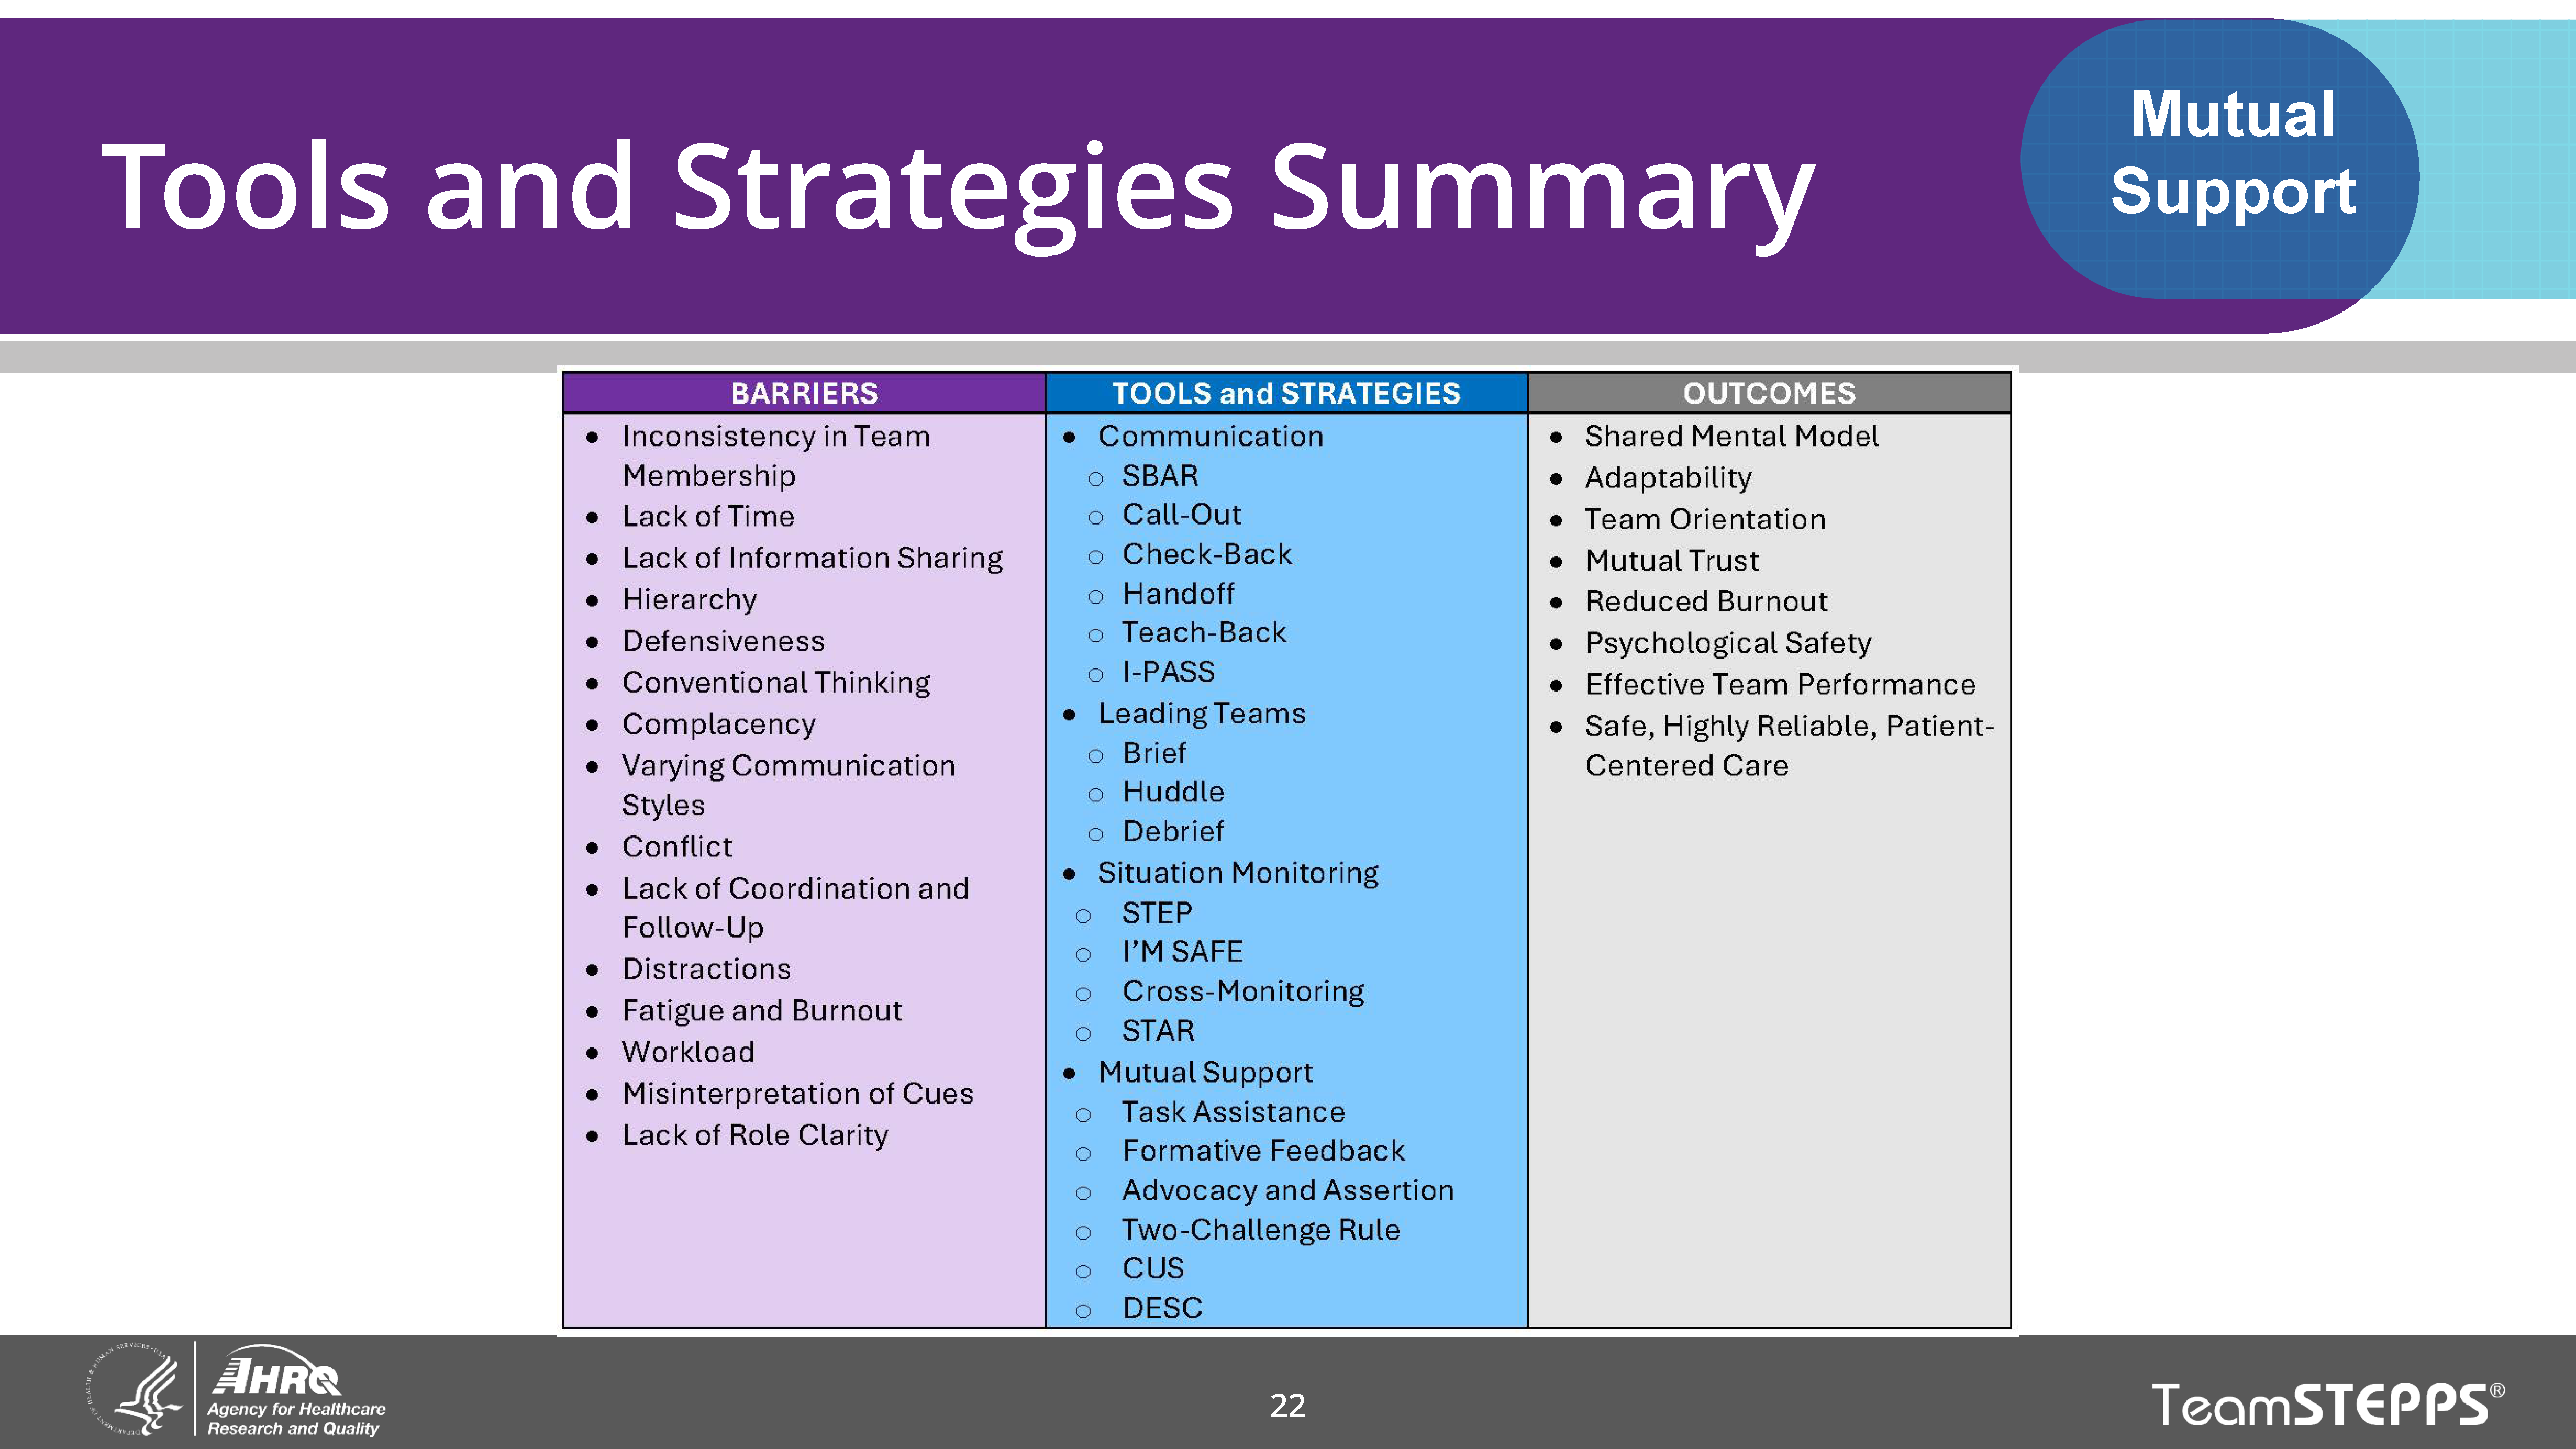 Image of slide: Using the Mutual Support tools and strategies to address barriers helps teams achieve positive outcomes for their team and patients.